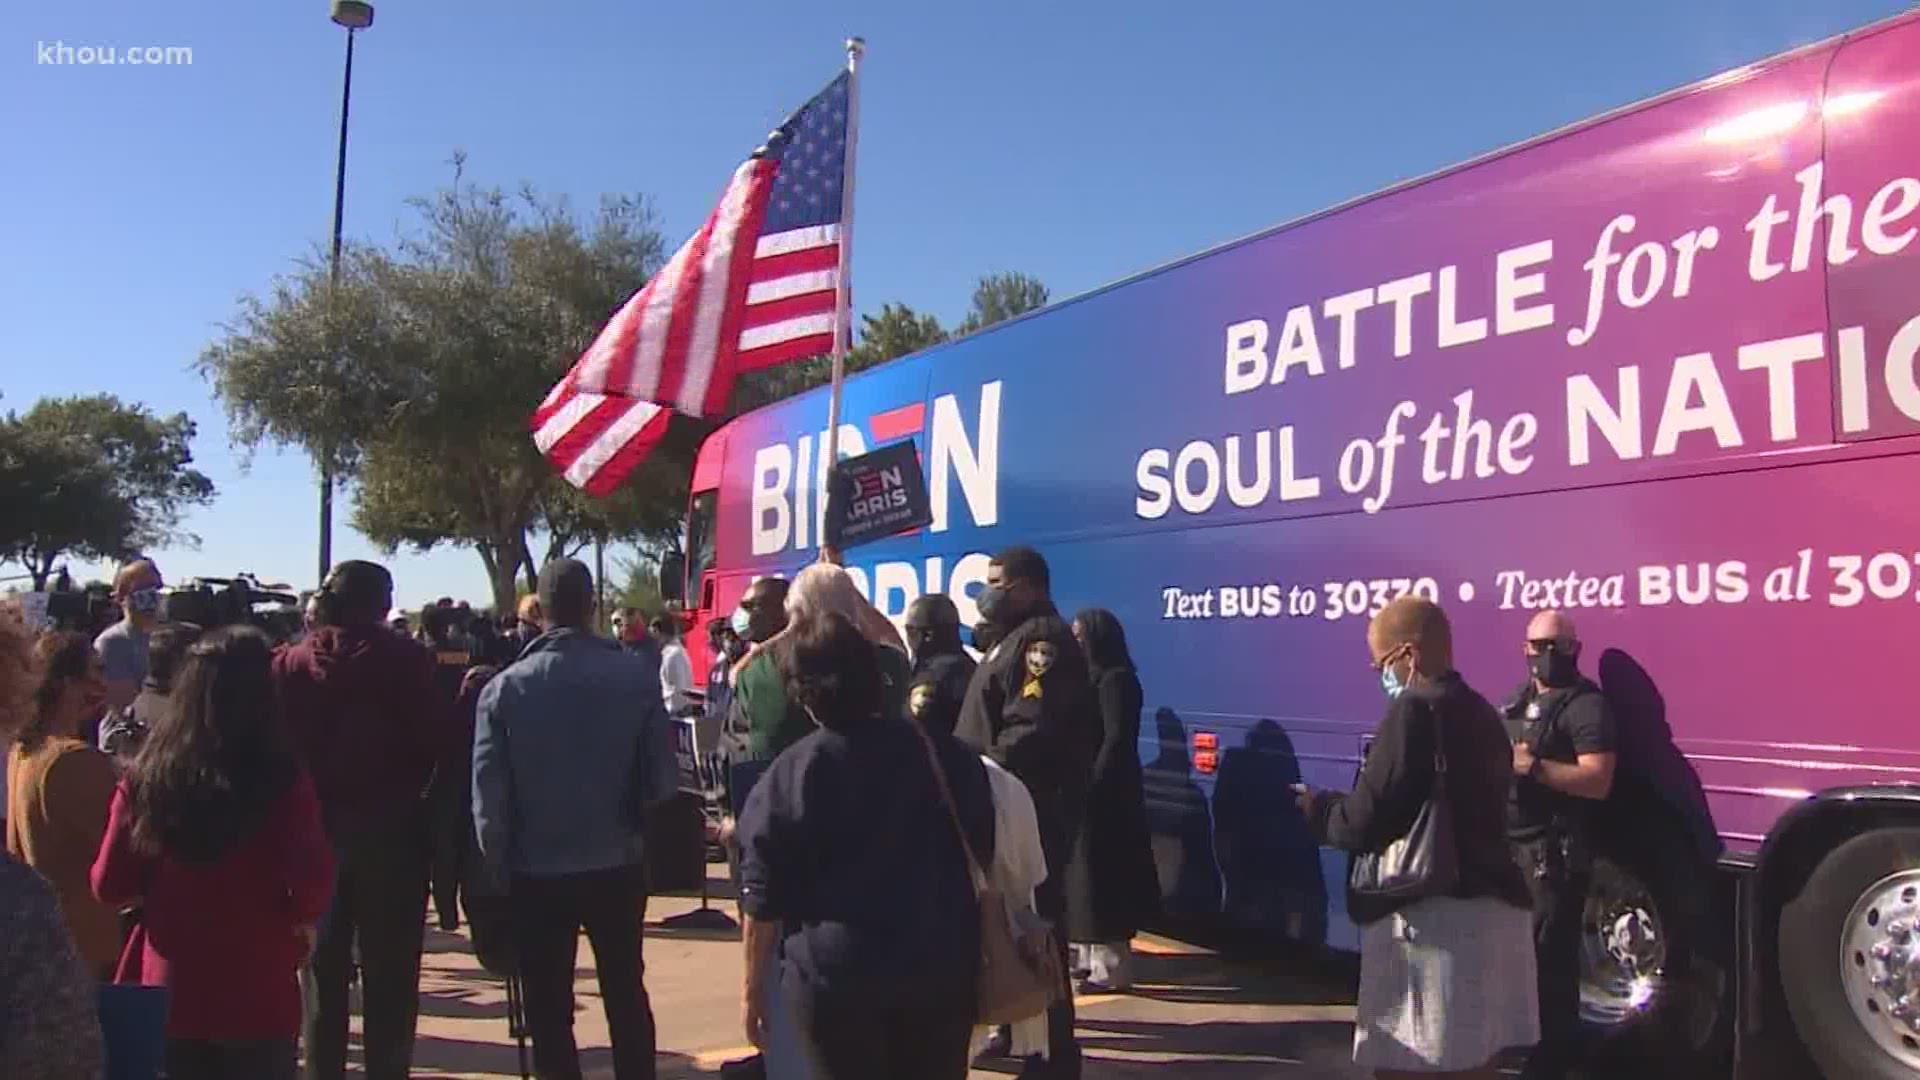 Joe Biden's campaign bus made a stop in Missouri City on Thursday in a final push for votes in the district.